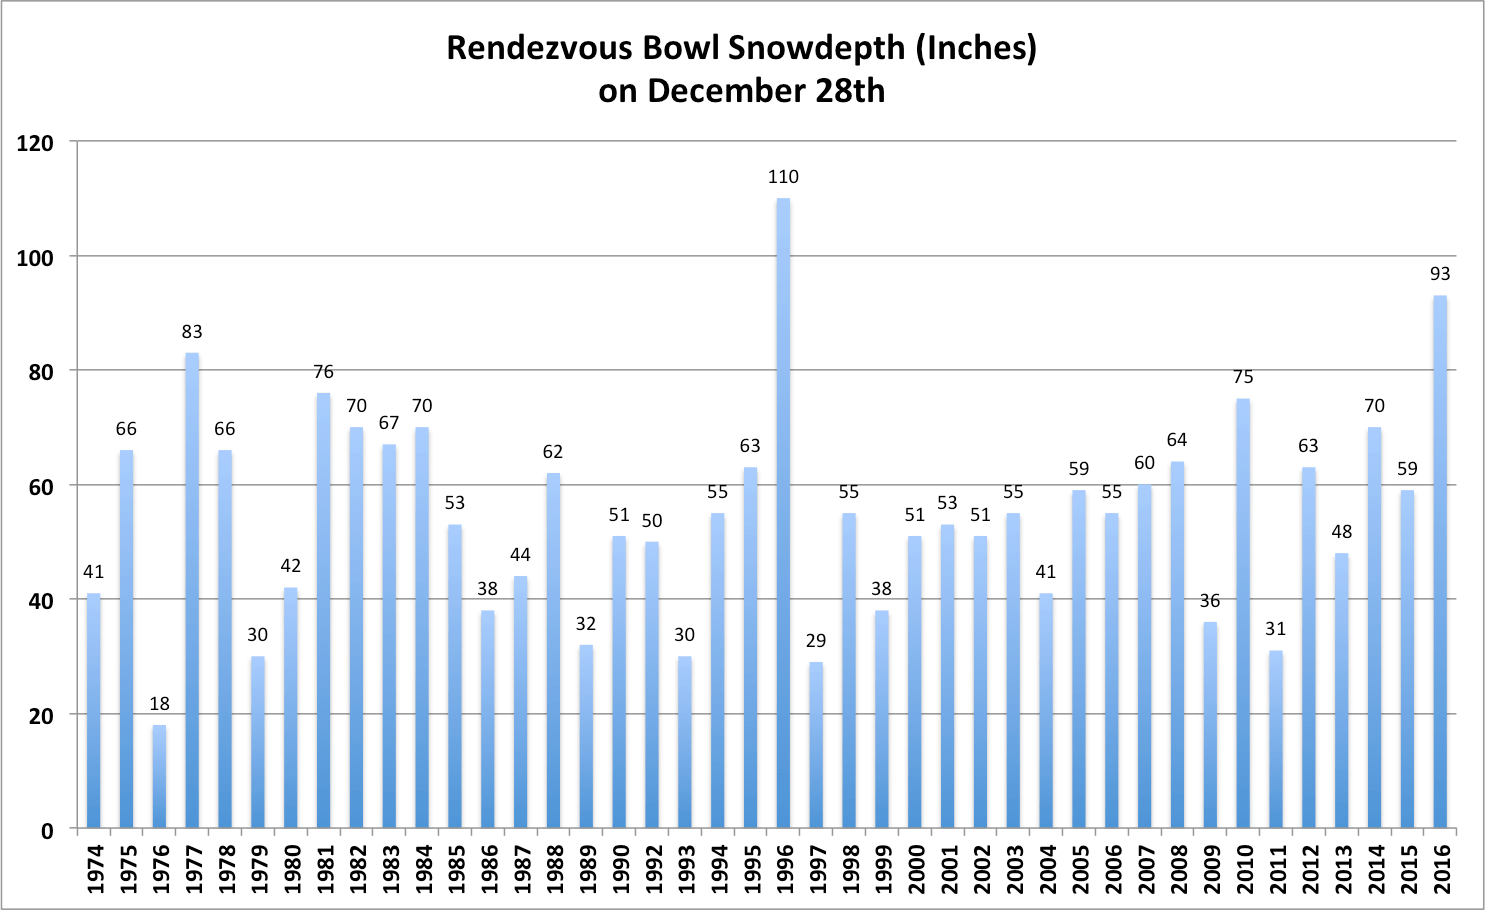 Rendezvous Bowl Snowdepth is looking GOOD.